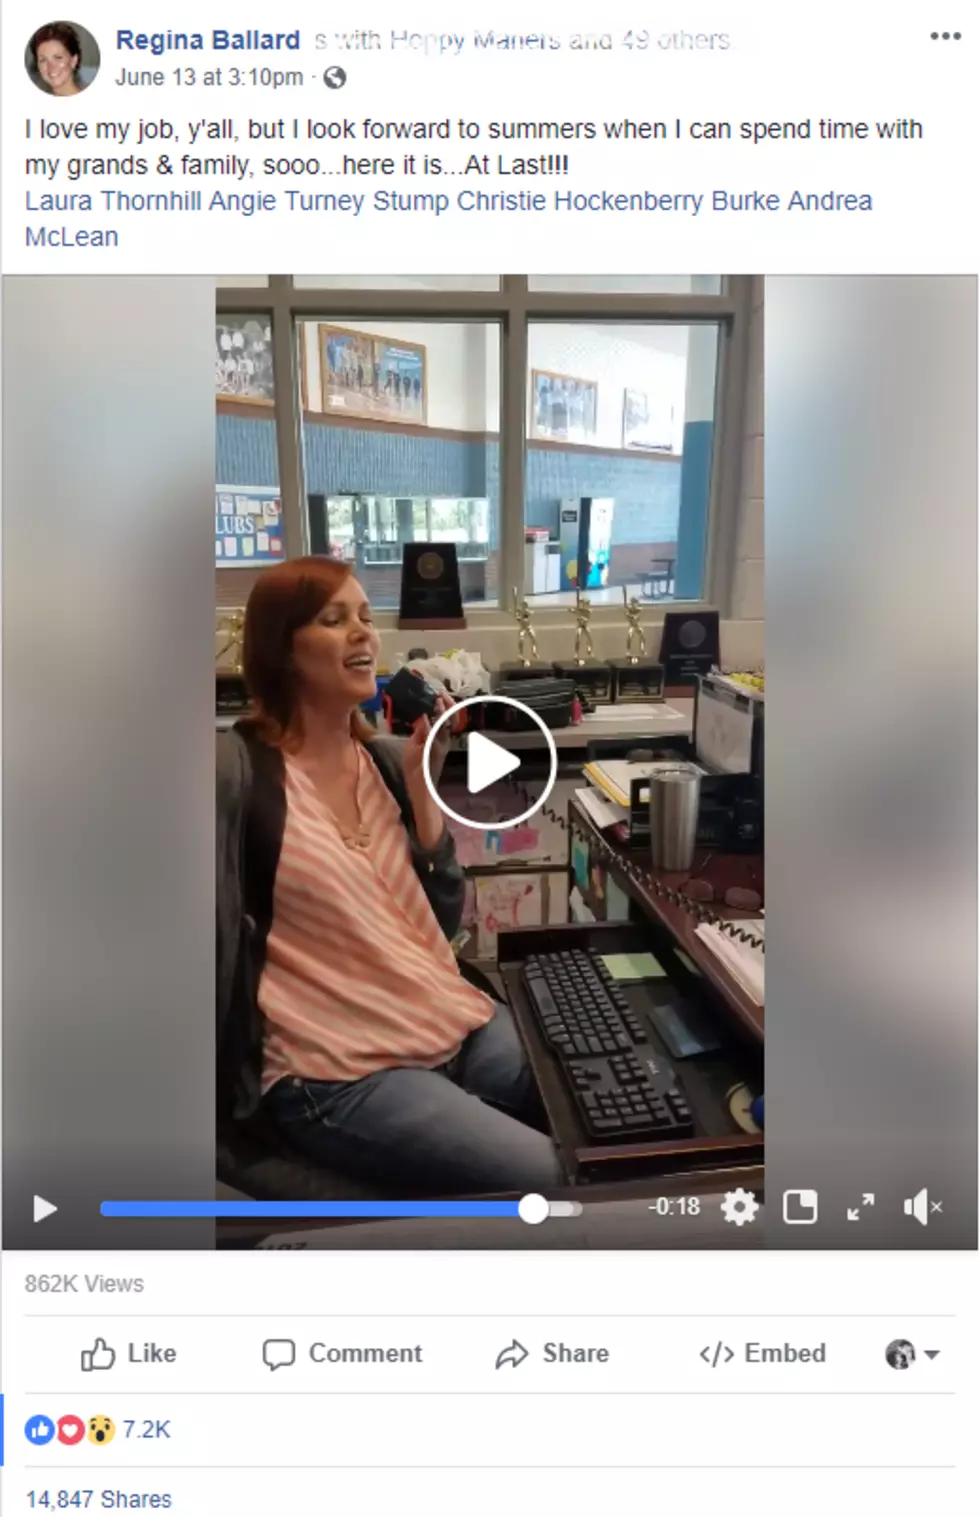 NAILED IT! NC Woman Sings &#8216;At Last&#8217; Over Intercom To Announce School Break